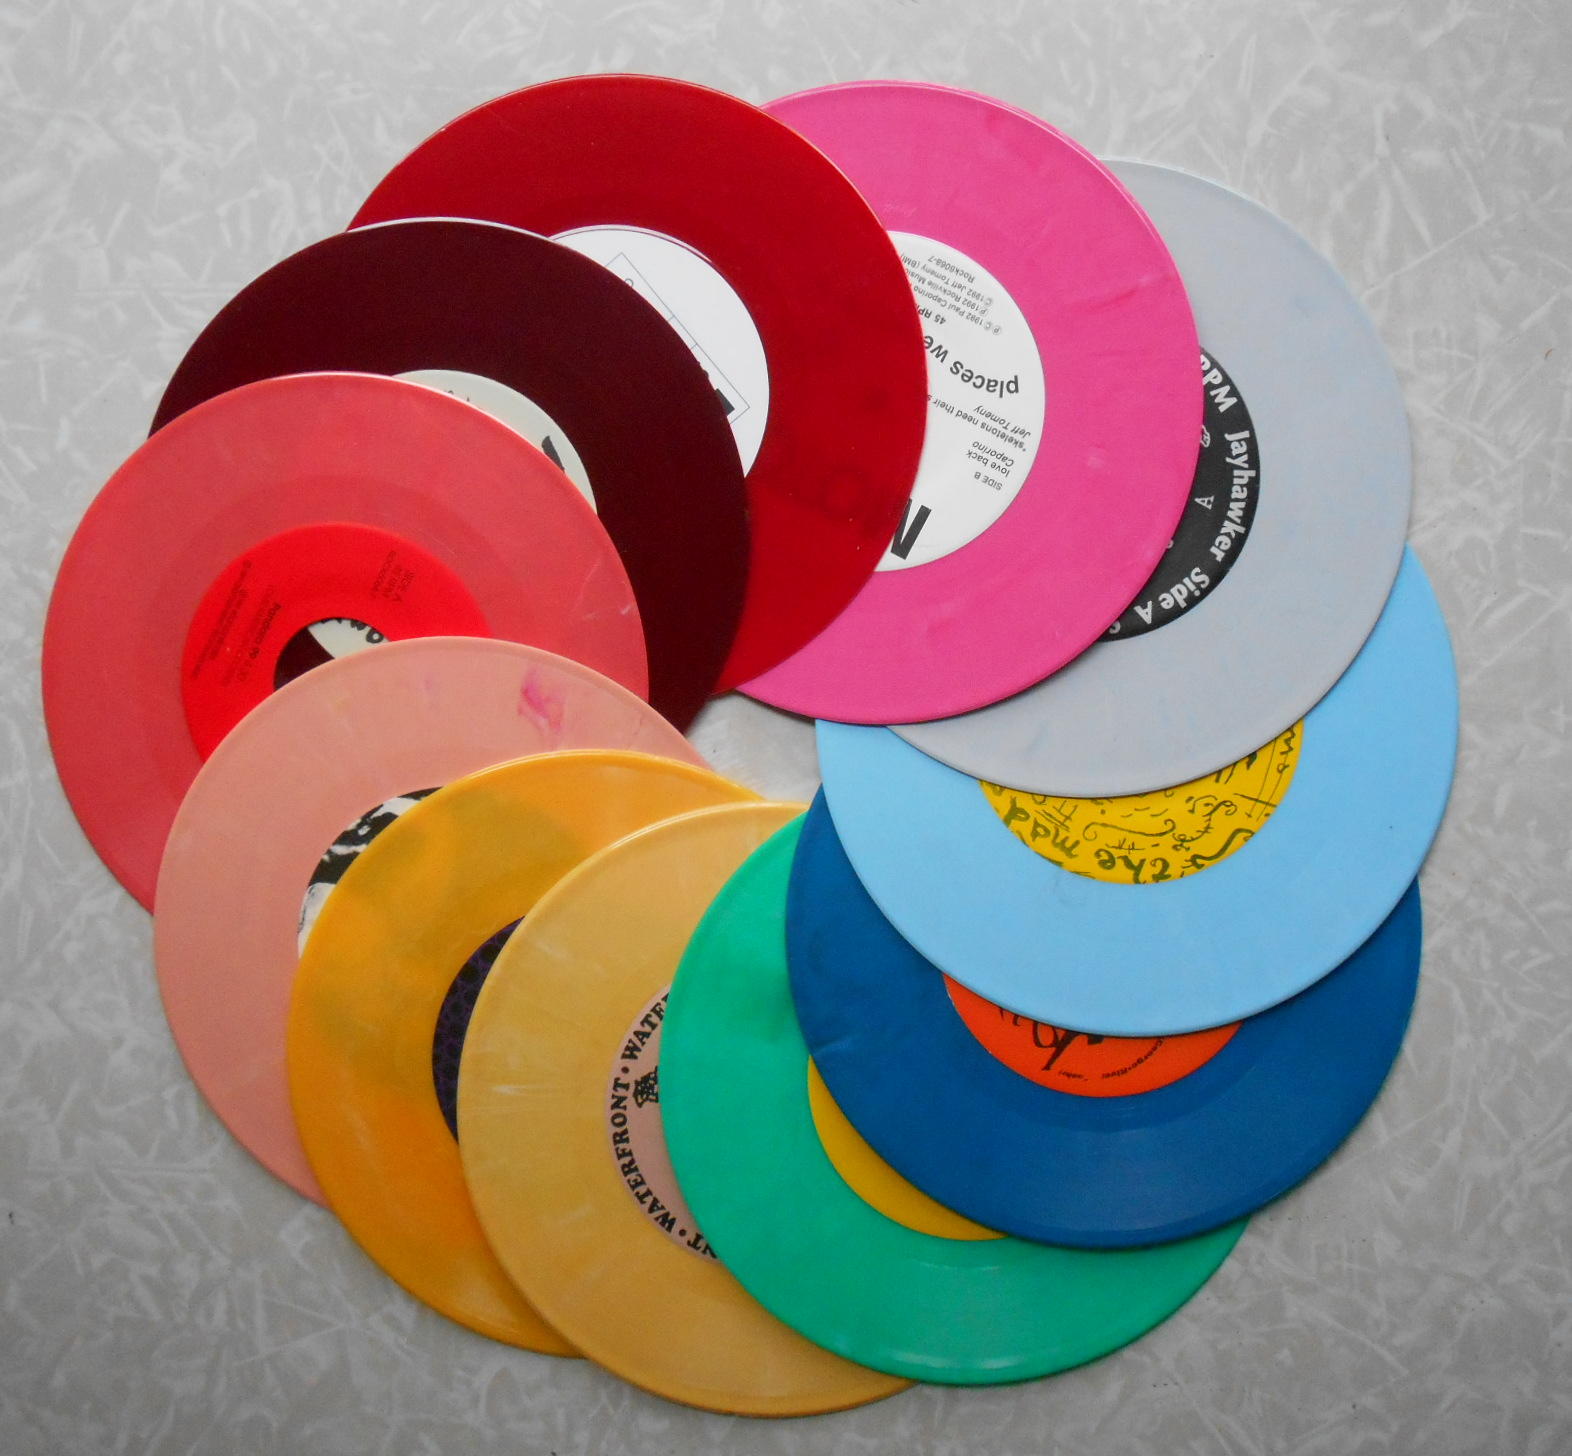 How to press colored vinyl records (and have them shipped directly